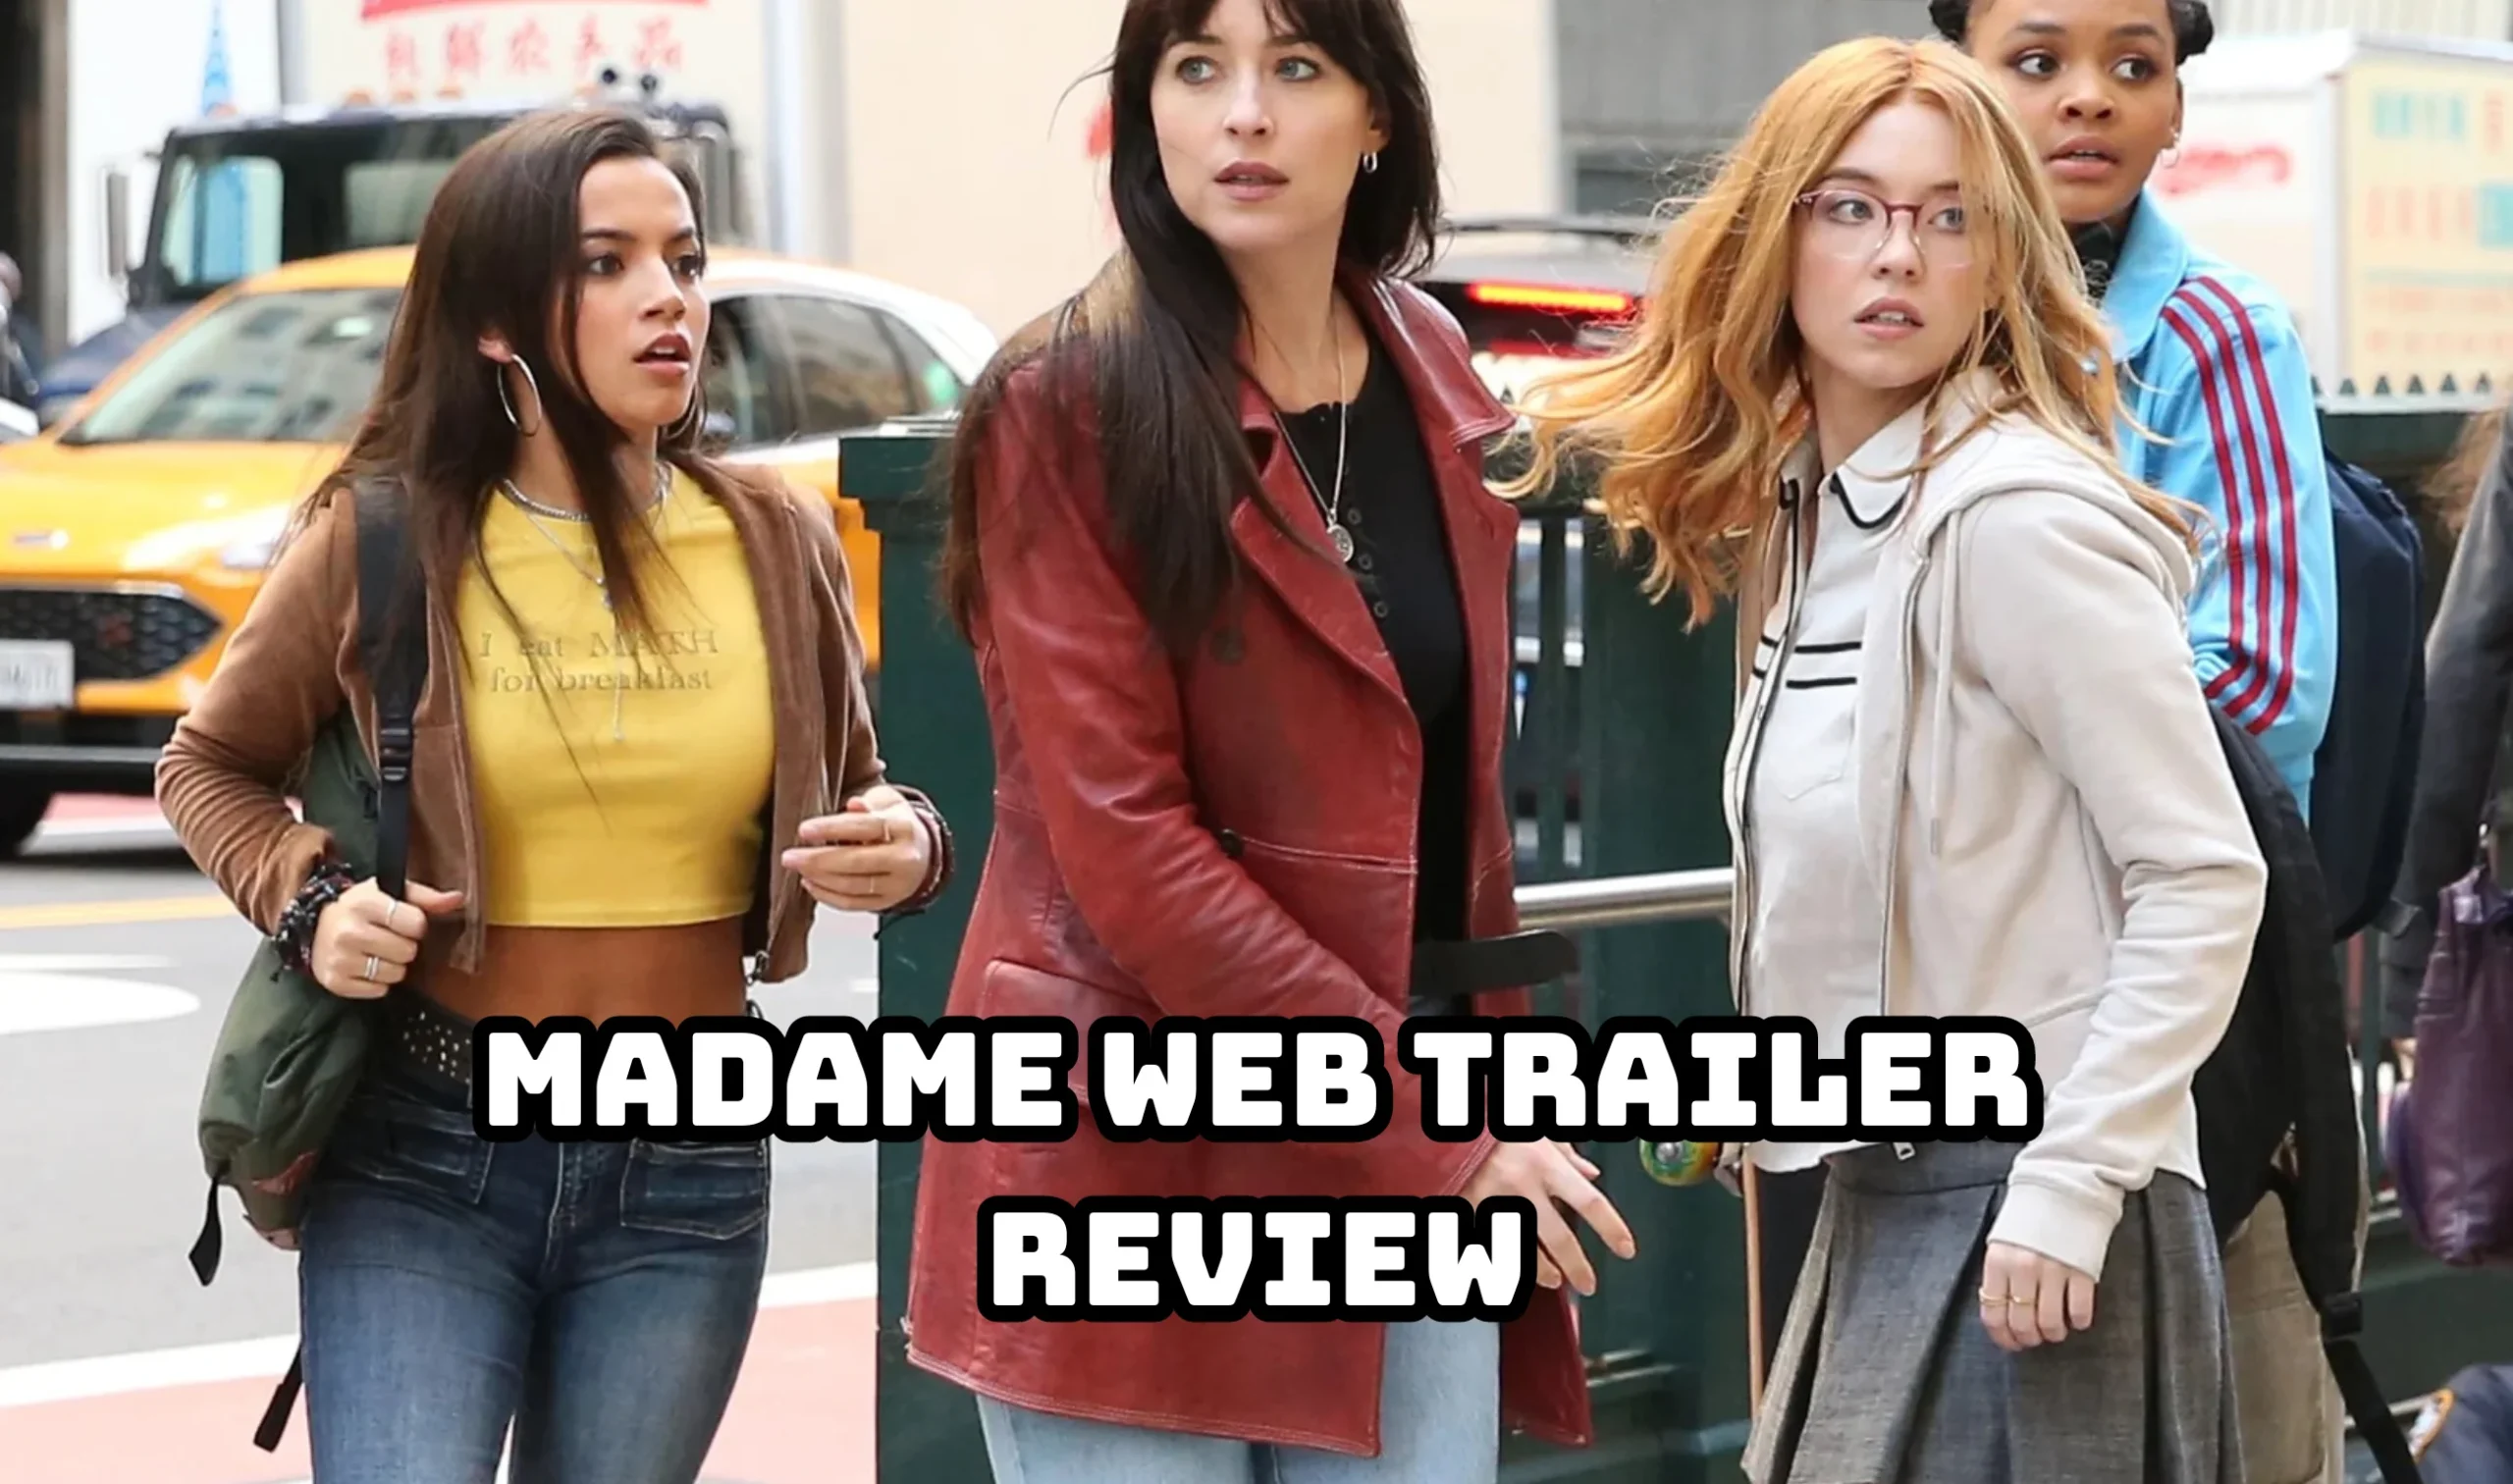 Madame Web Trailer Review (Cheap Product Again by Sony)